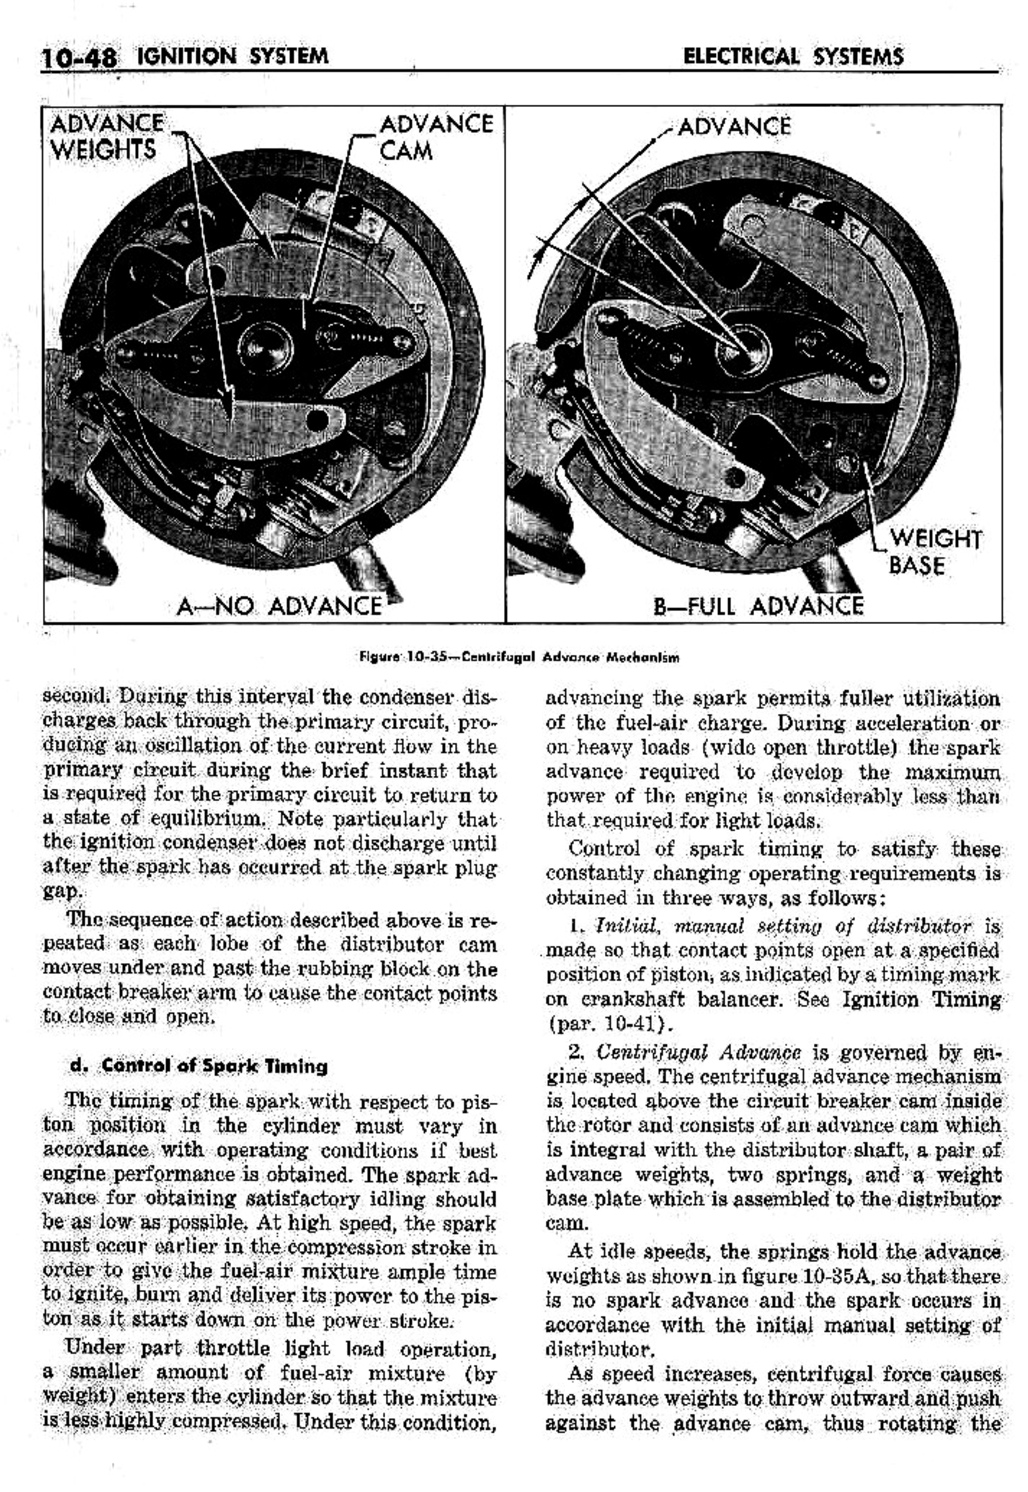 n_11 1959 Buick Shop Manual - Electrical Systems-048-048.jpg